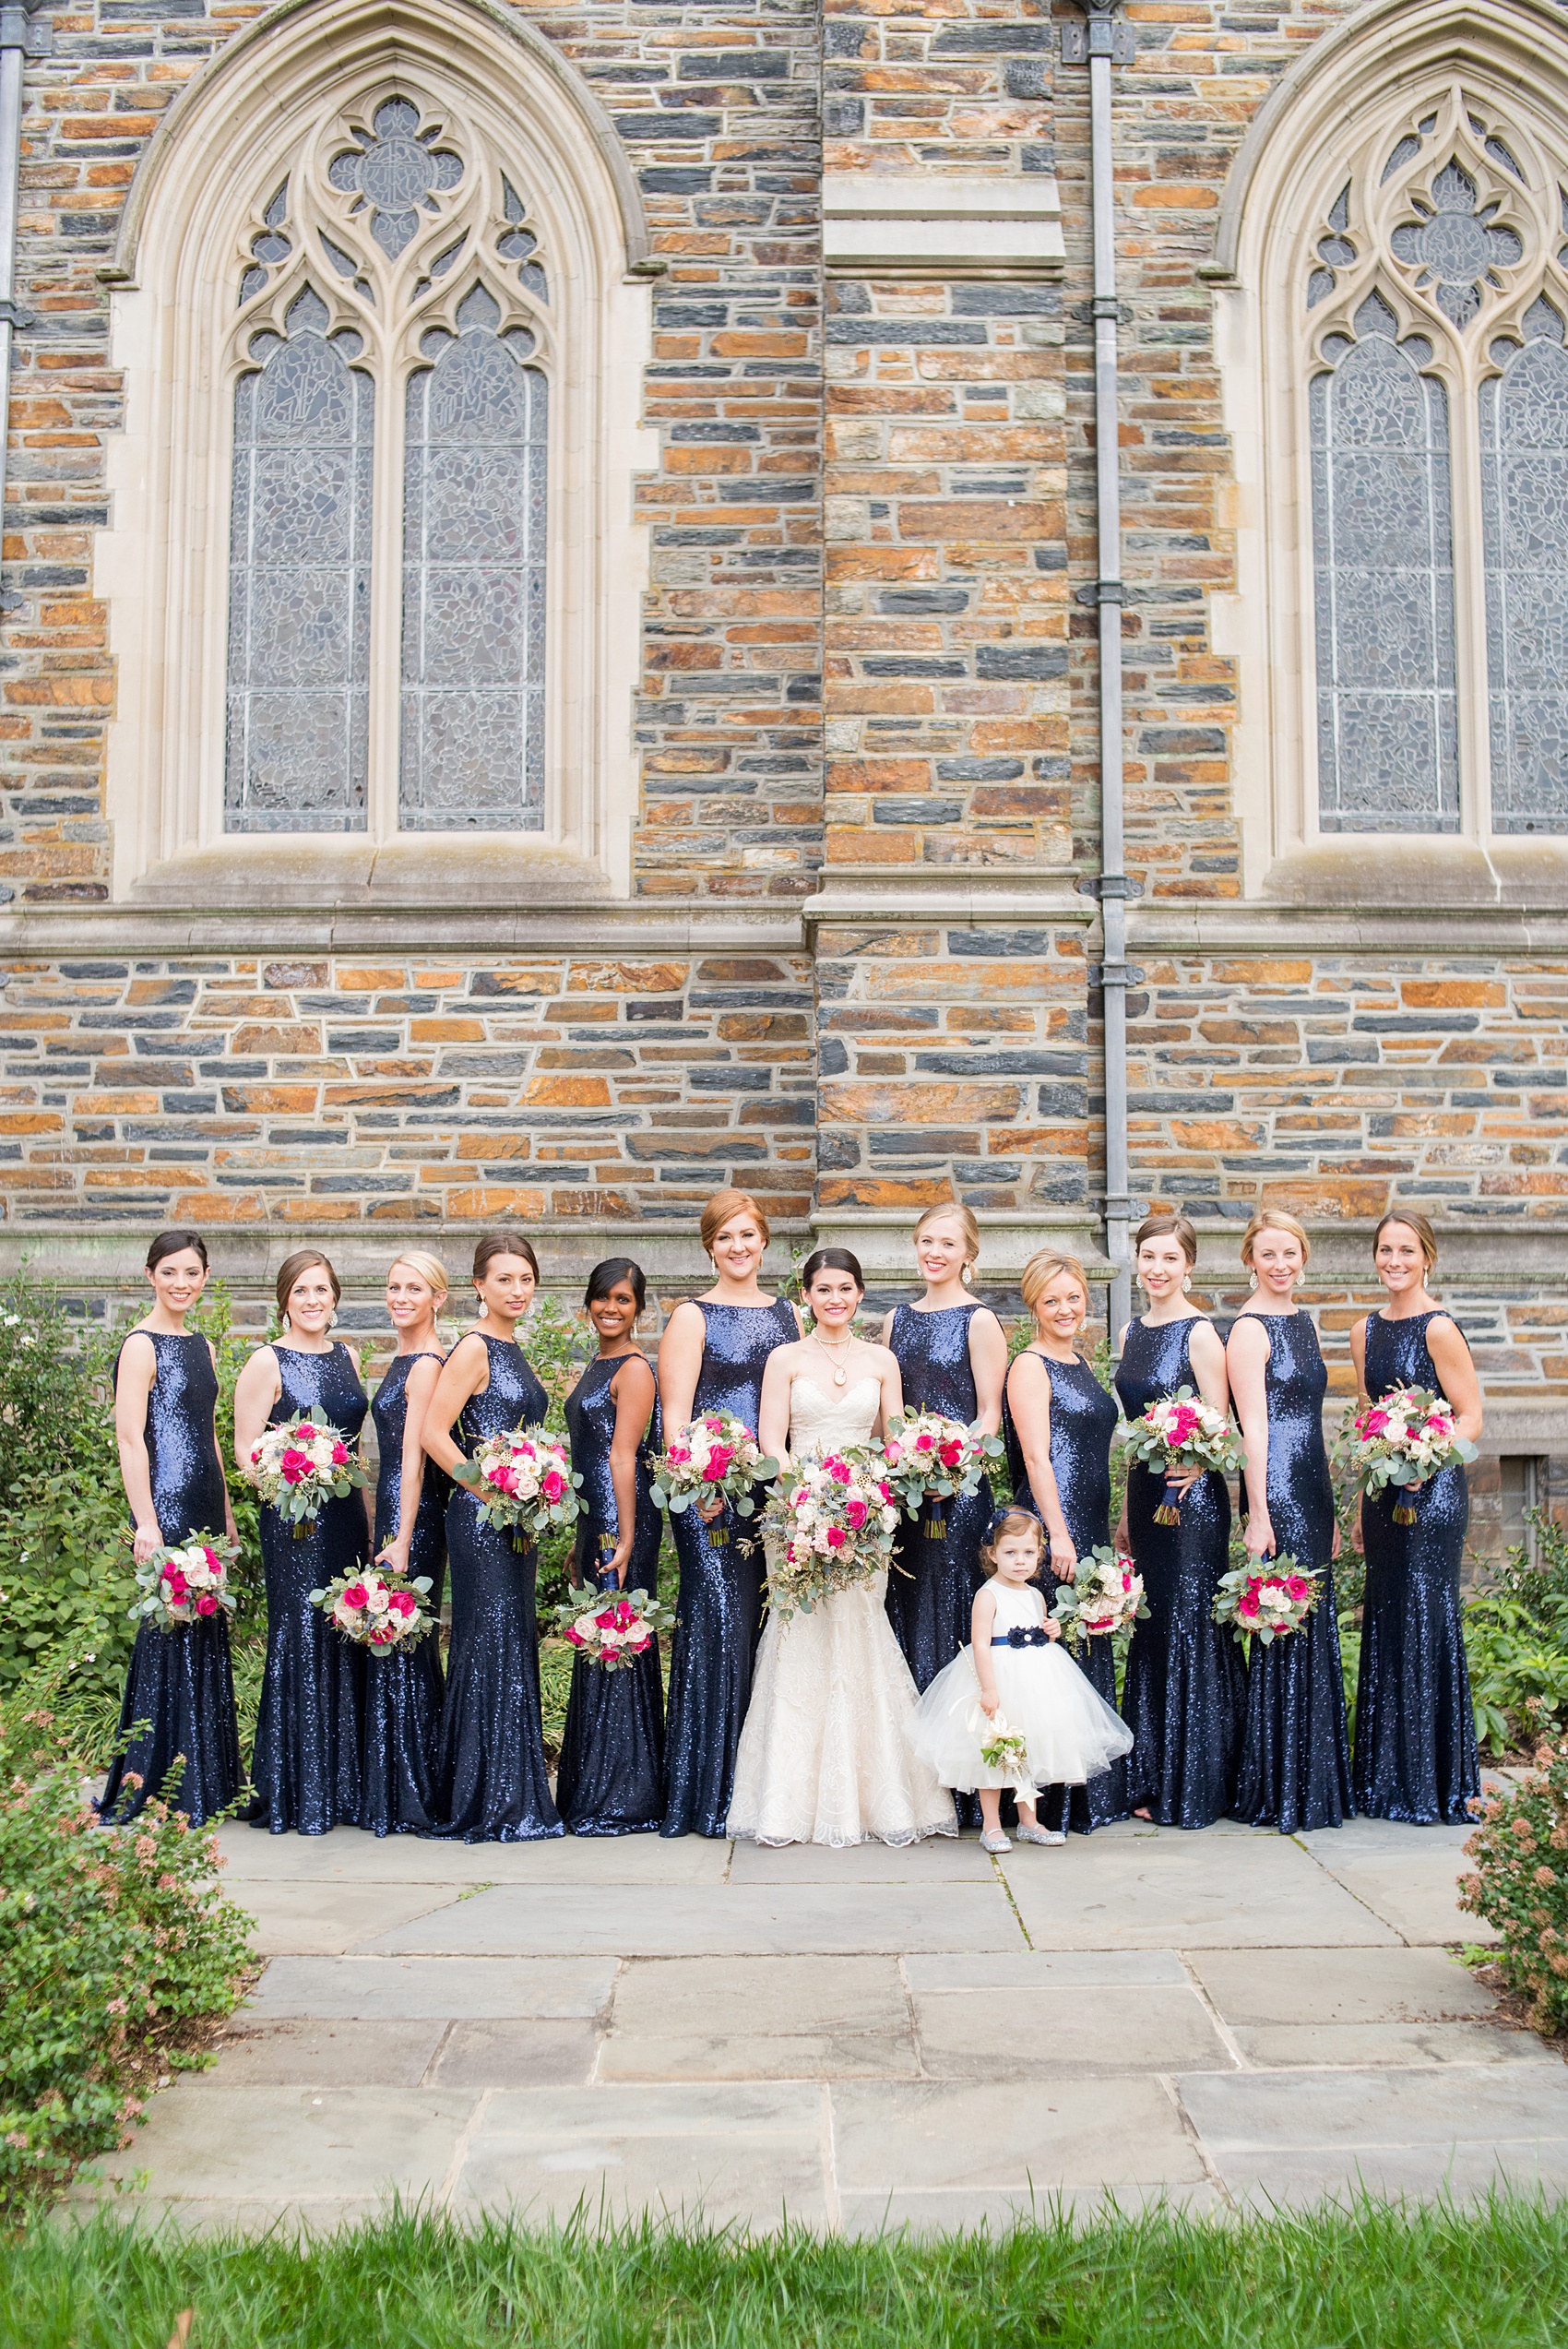 Mikkel Paige Photography photo of a wedding in Chapel Hill at Duke Chapel. Vogue like picture of the bridal party in blue sequin, low back gowns with the gothic architecture of the church.